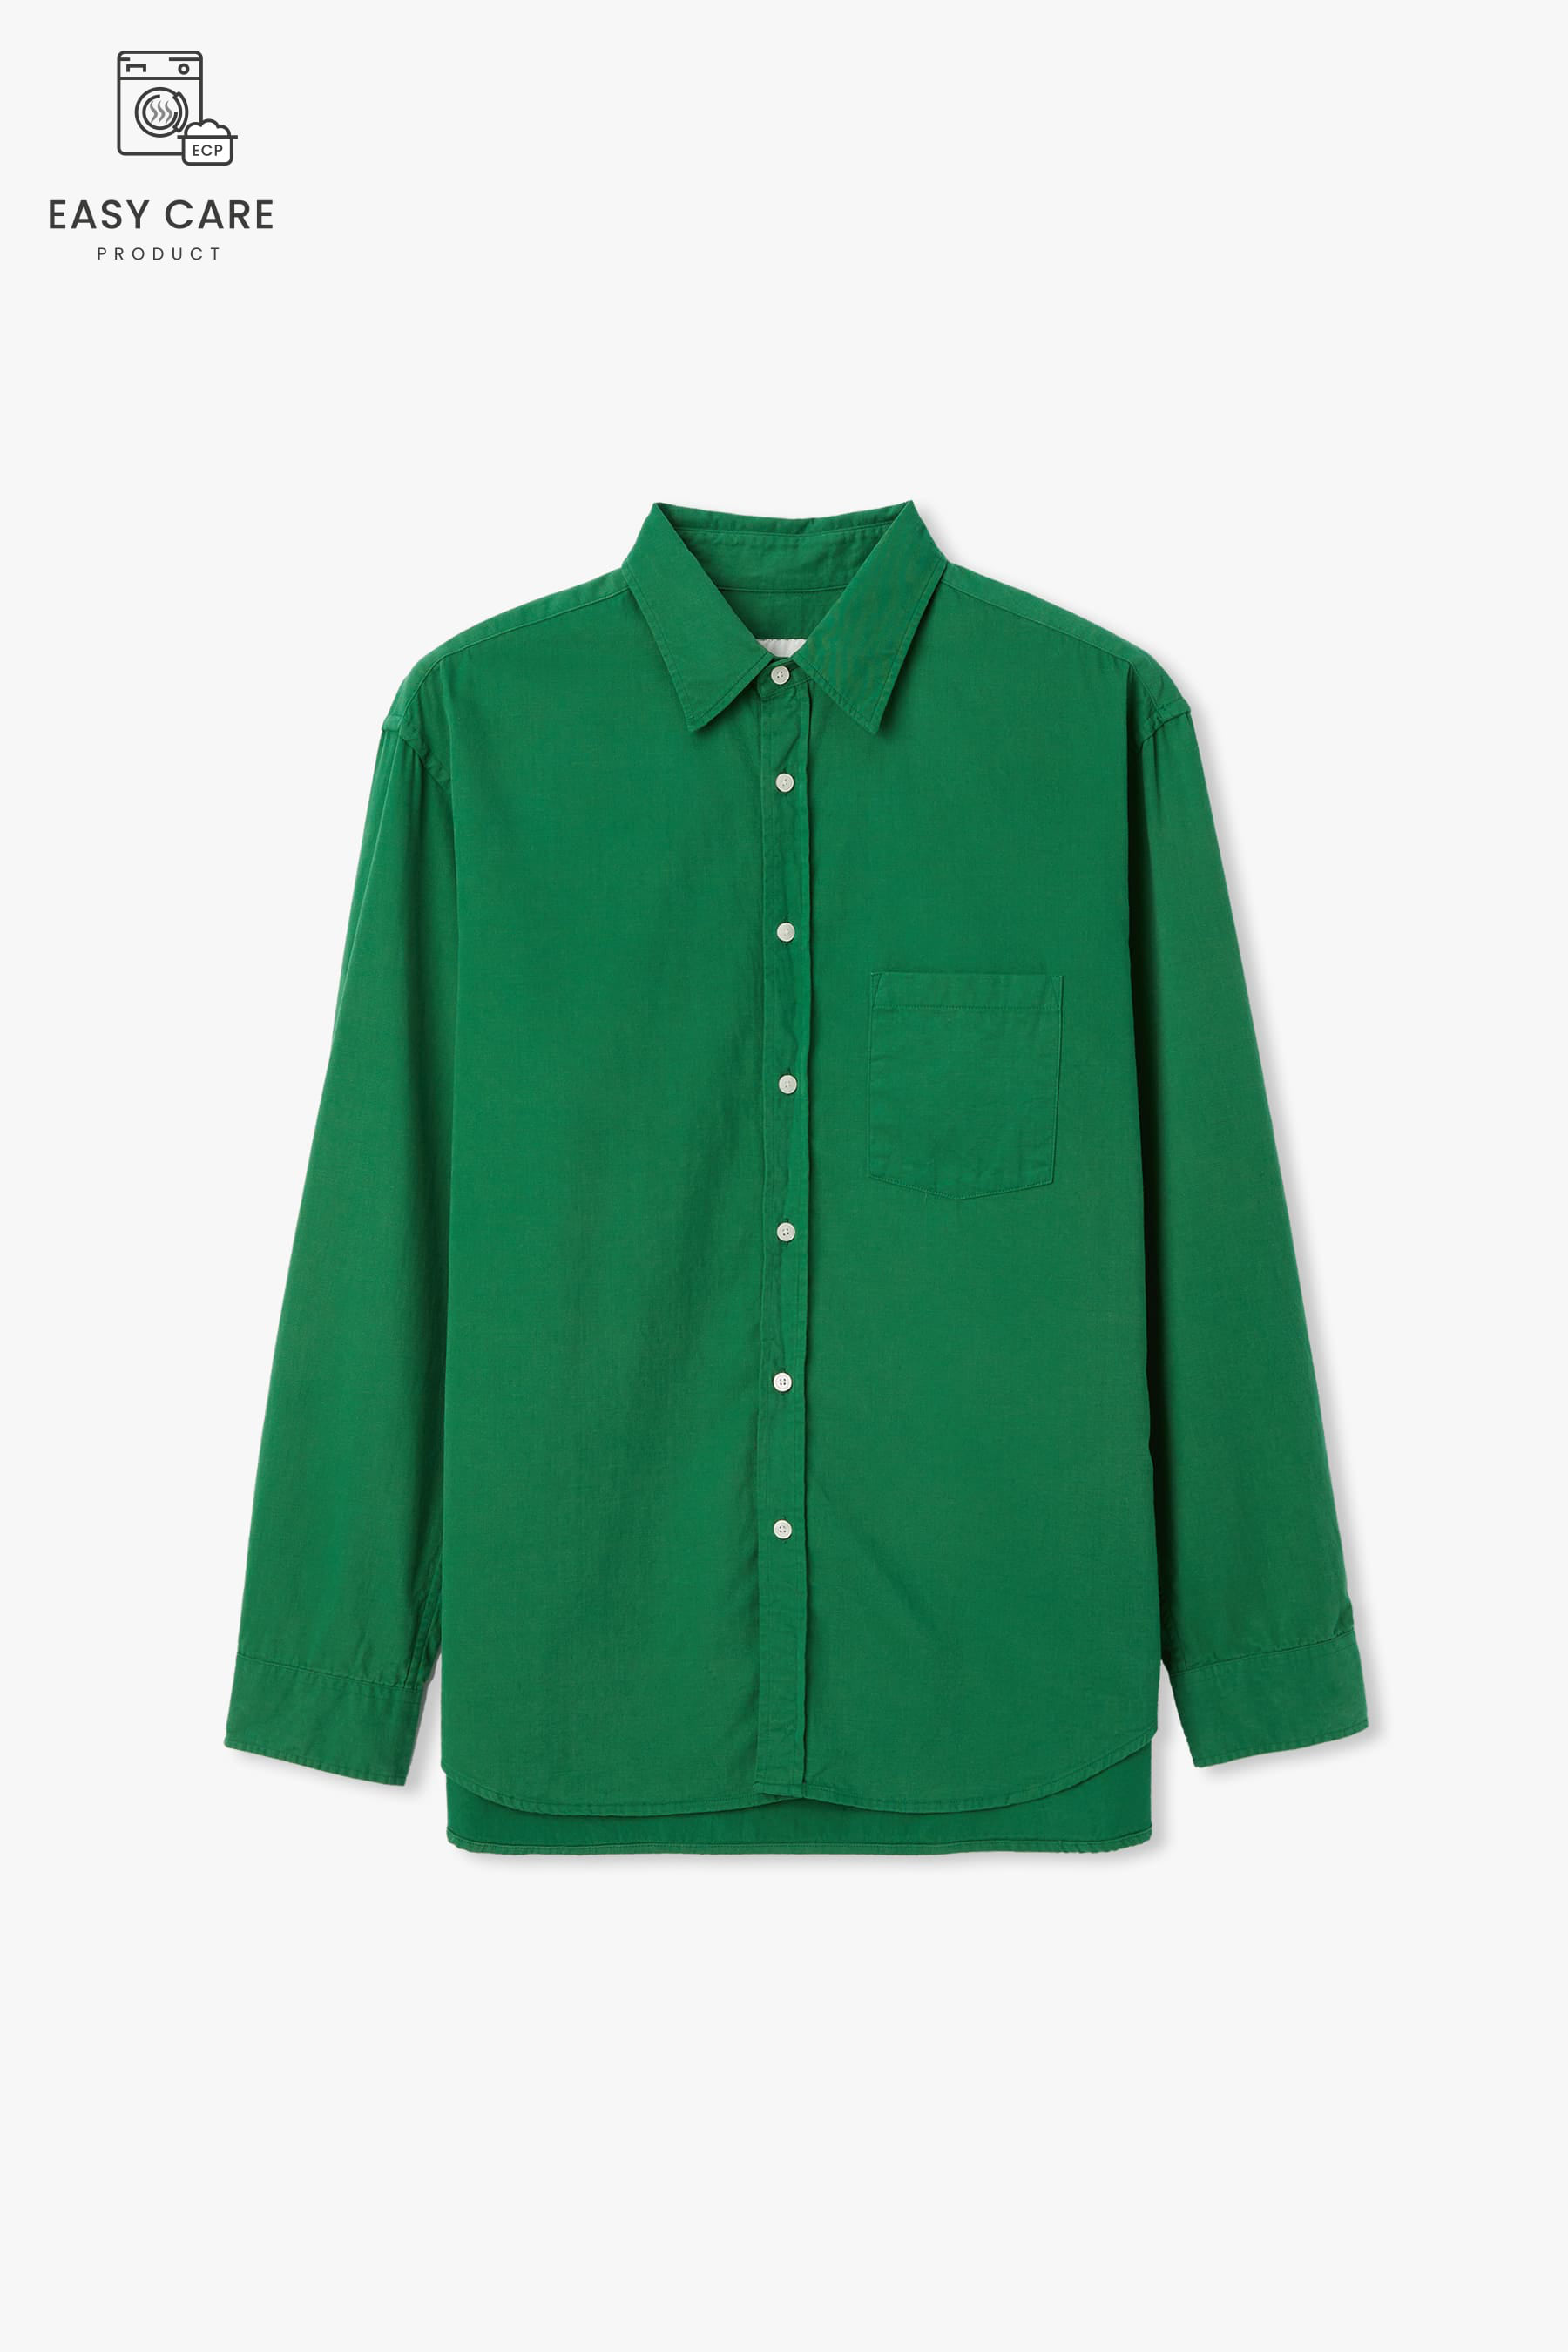 [PO 5/22 순차발송] SHAMROCK GREEN YRS POIKA COTTON DRILL WASHED SHIRTS CLASSIC FIT (ECP GARMENT PROCESS)